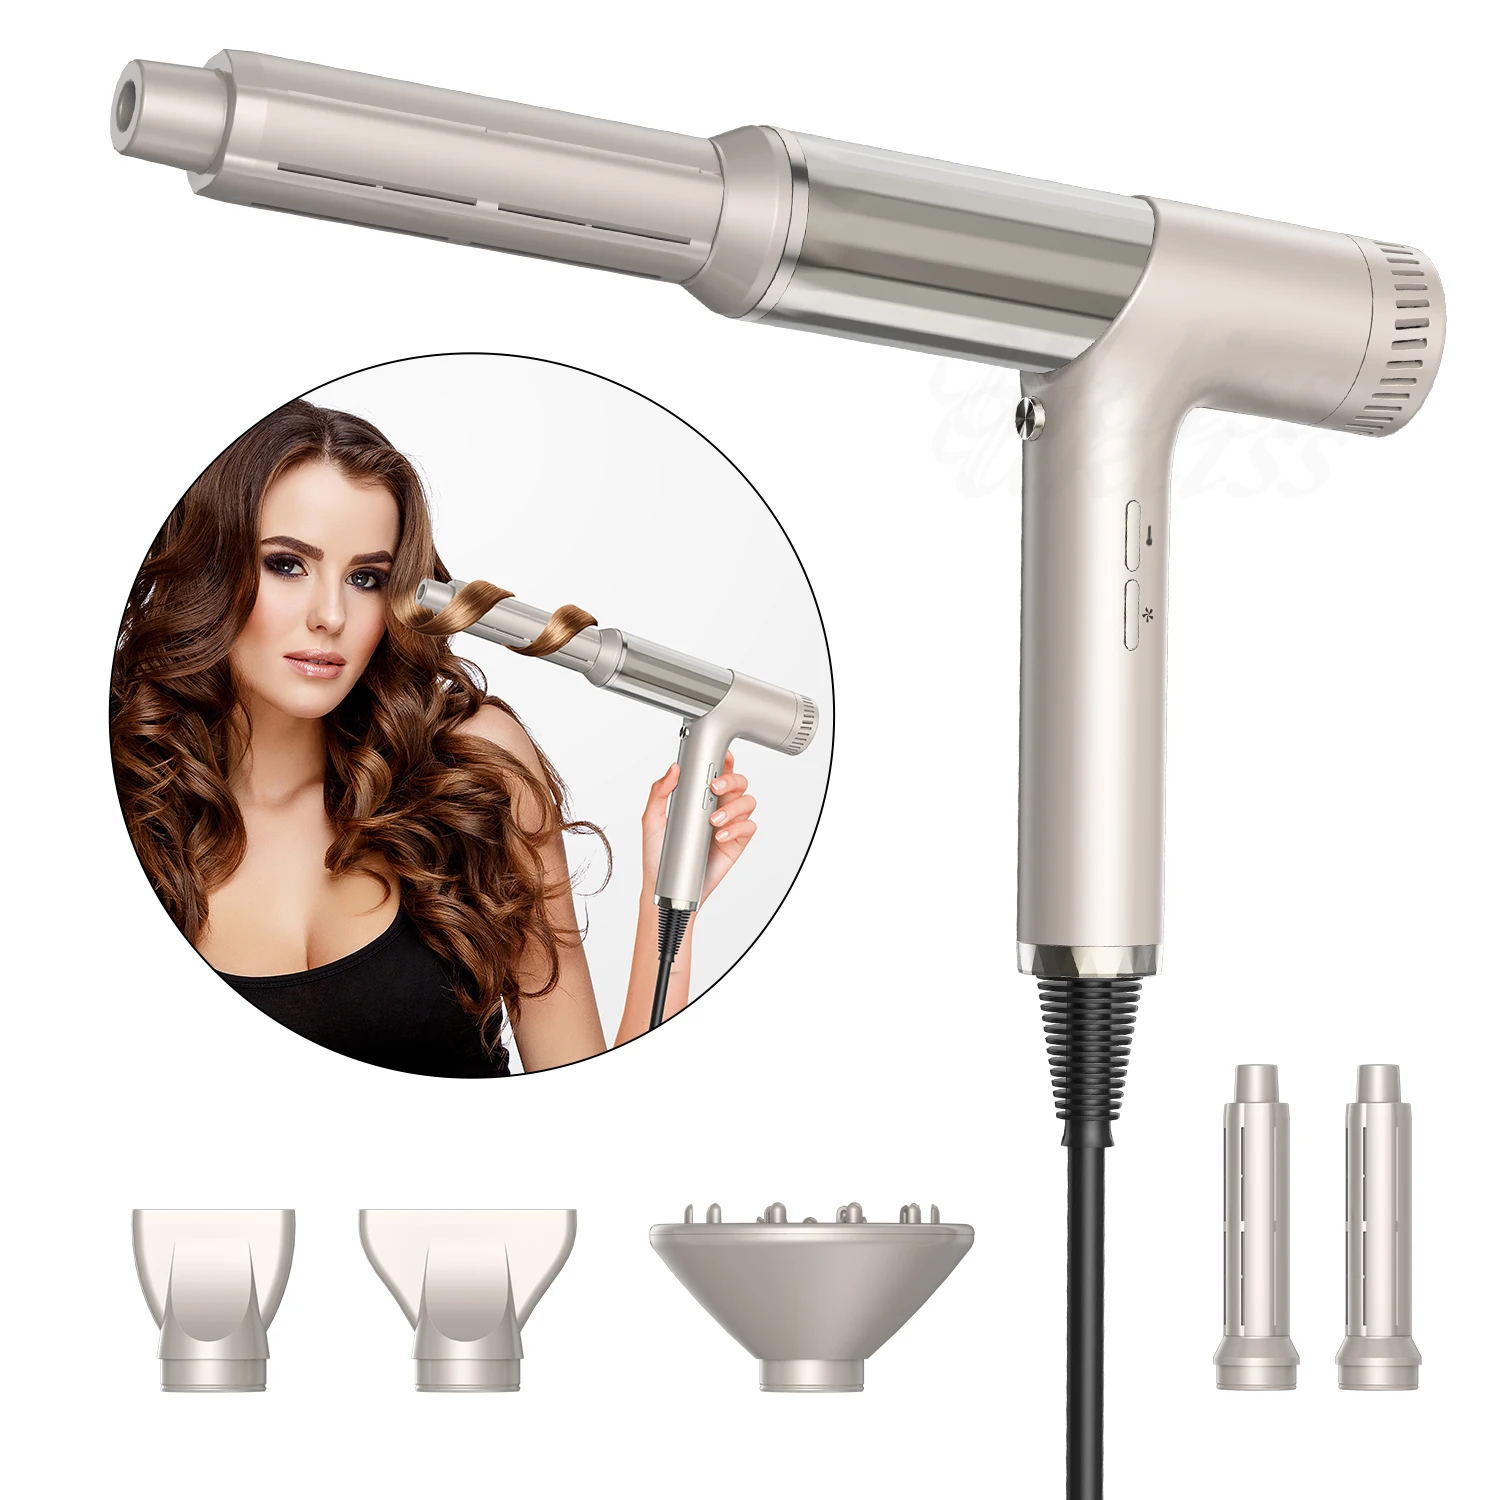 

Professional 5 In 1 Hair Dryer 1400W Ionic Blow Dryer 110000RPM Brushless High Speed Hairdryer Air Styling Curling Iron Wand